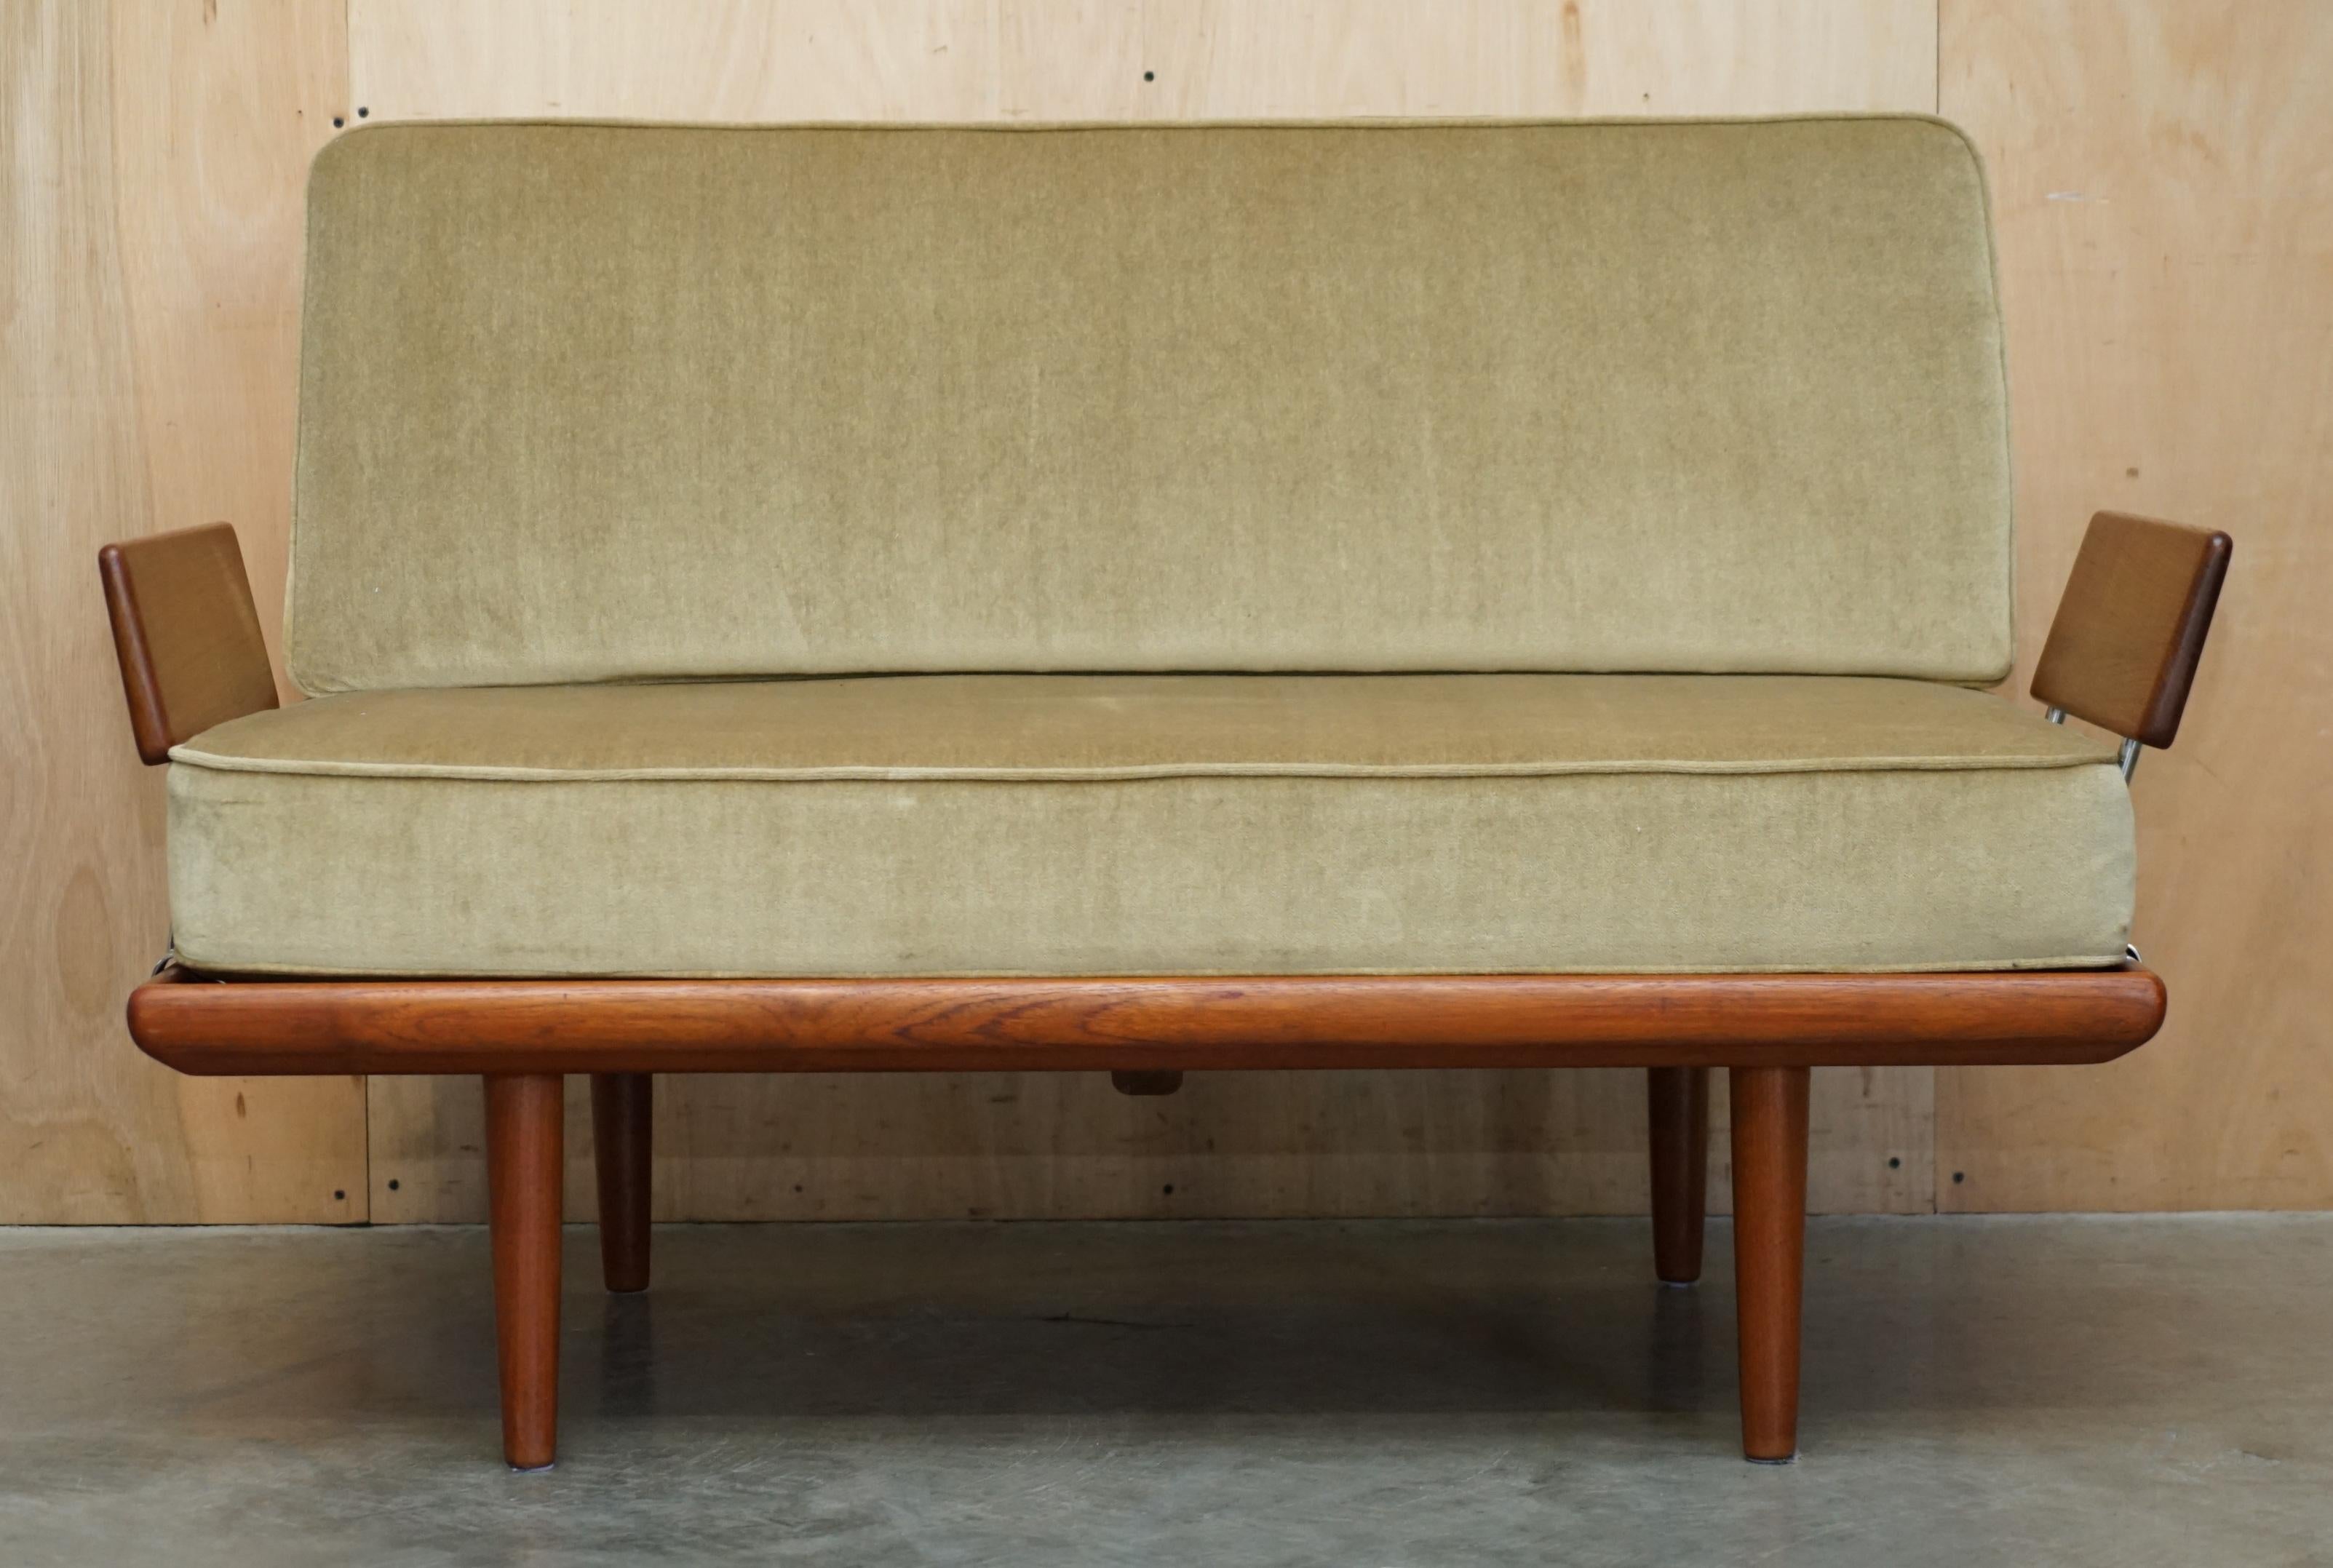 Royal House Antiques

Royal House Antiques is delighted to offer for sale this stunning original Mid Century Modern circa 1960 Peter Hvidt and Orla Mølgaard Nielsen for France & Son daybed sofa 

Please note the delivery fee listed is just a guide,